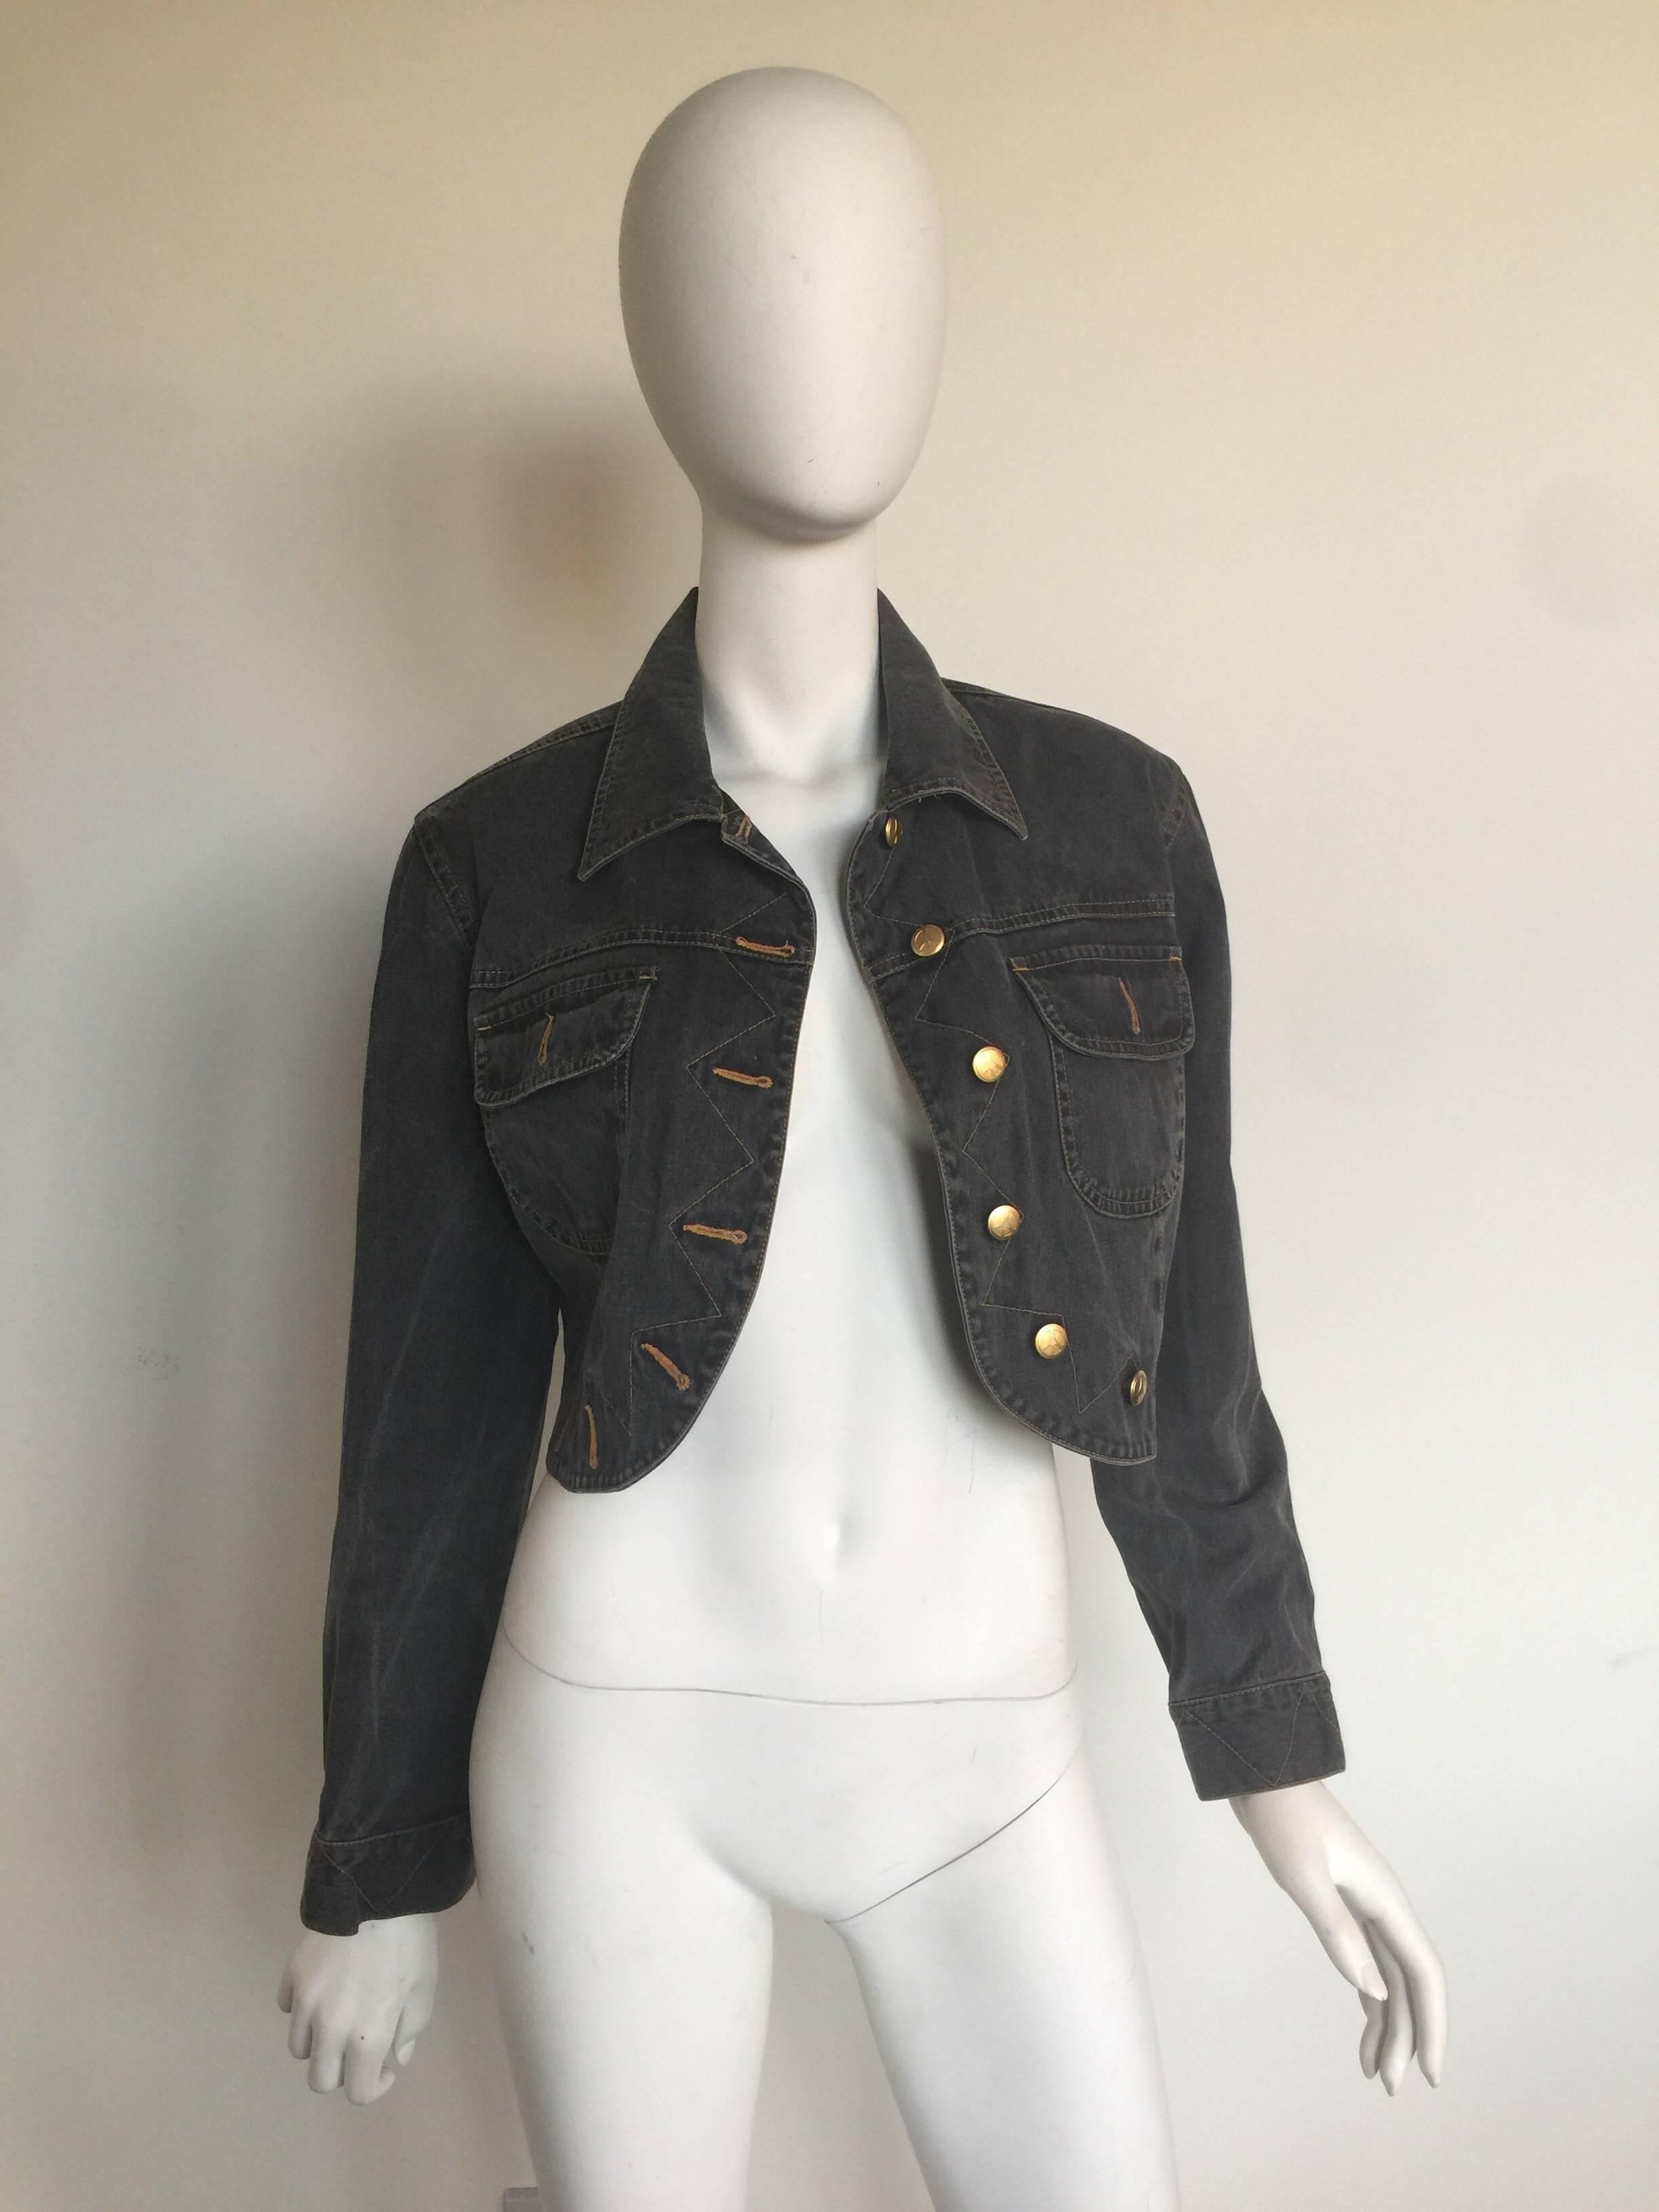 This cropped denim jacket has gold peace sign buttons and pocket details.  It is from the 1980s.  It is a dark grey blue in color.  It has two front pockets and all buttons in good condition. 